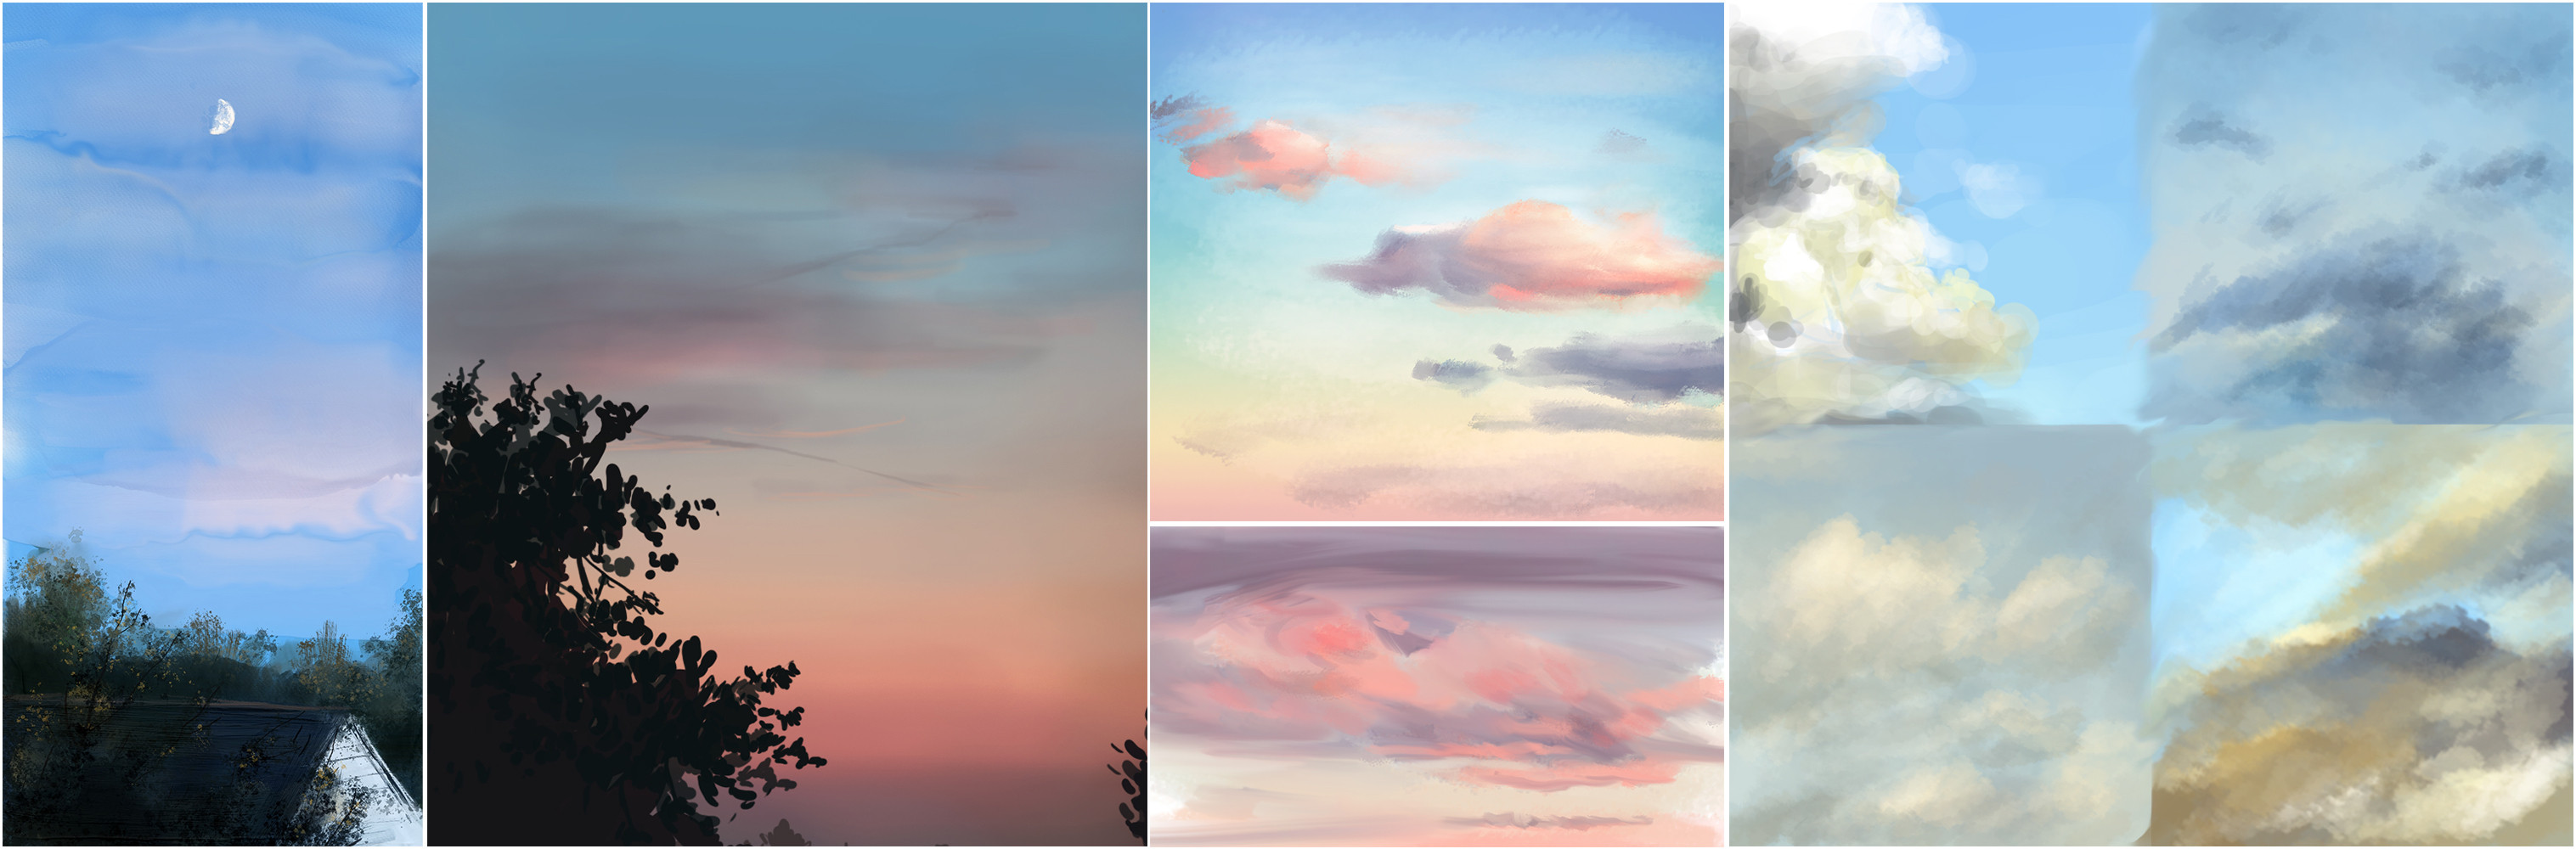 Studies from real life, looking at the sky through my window.